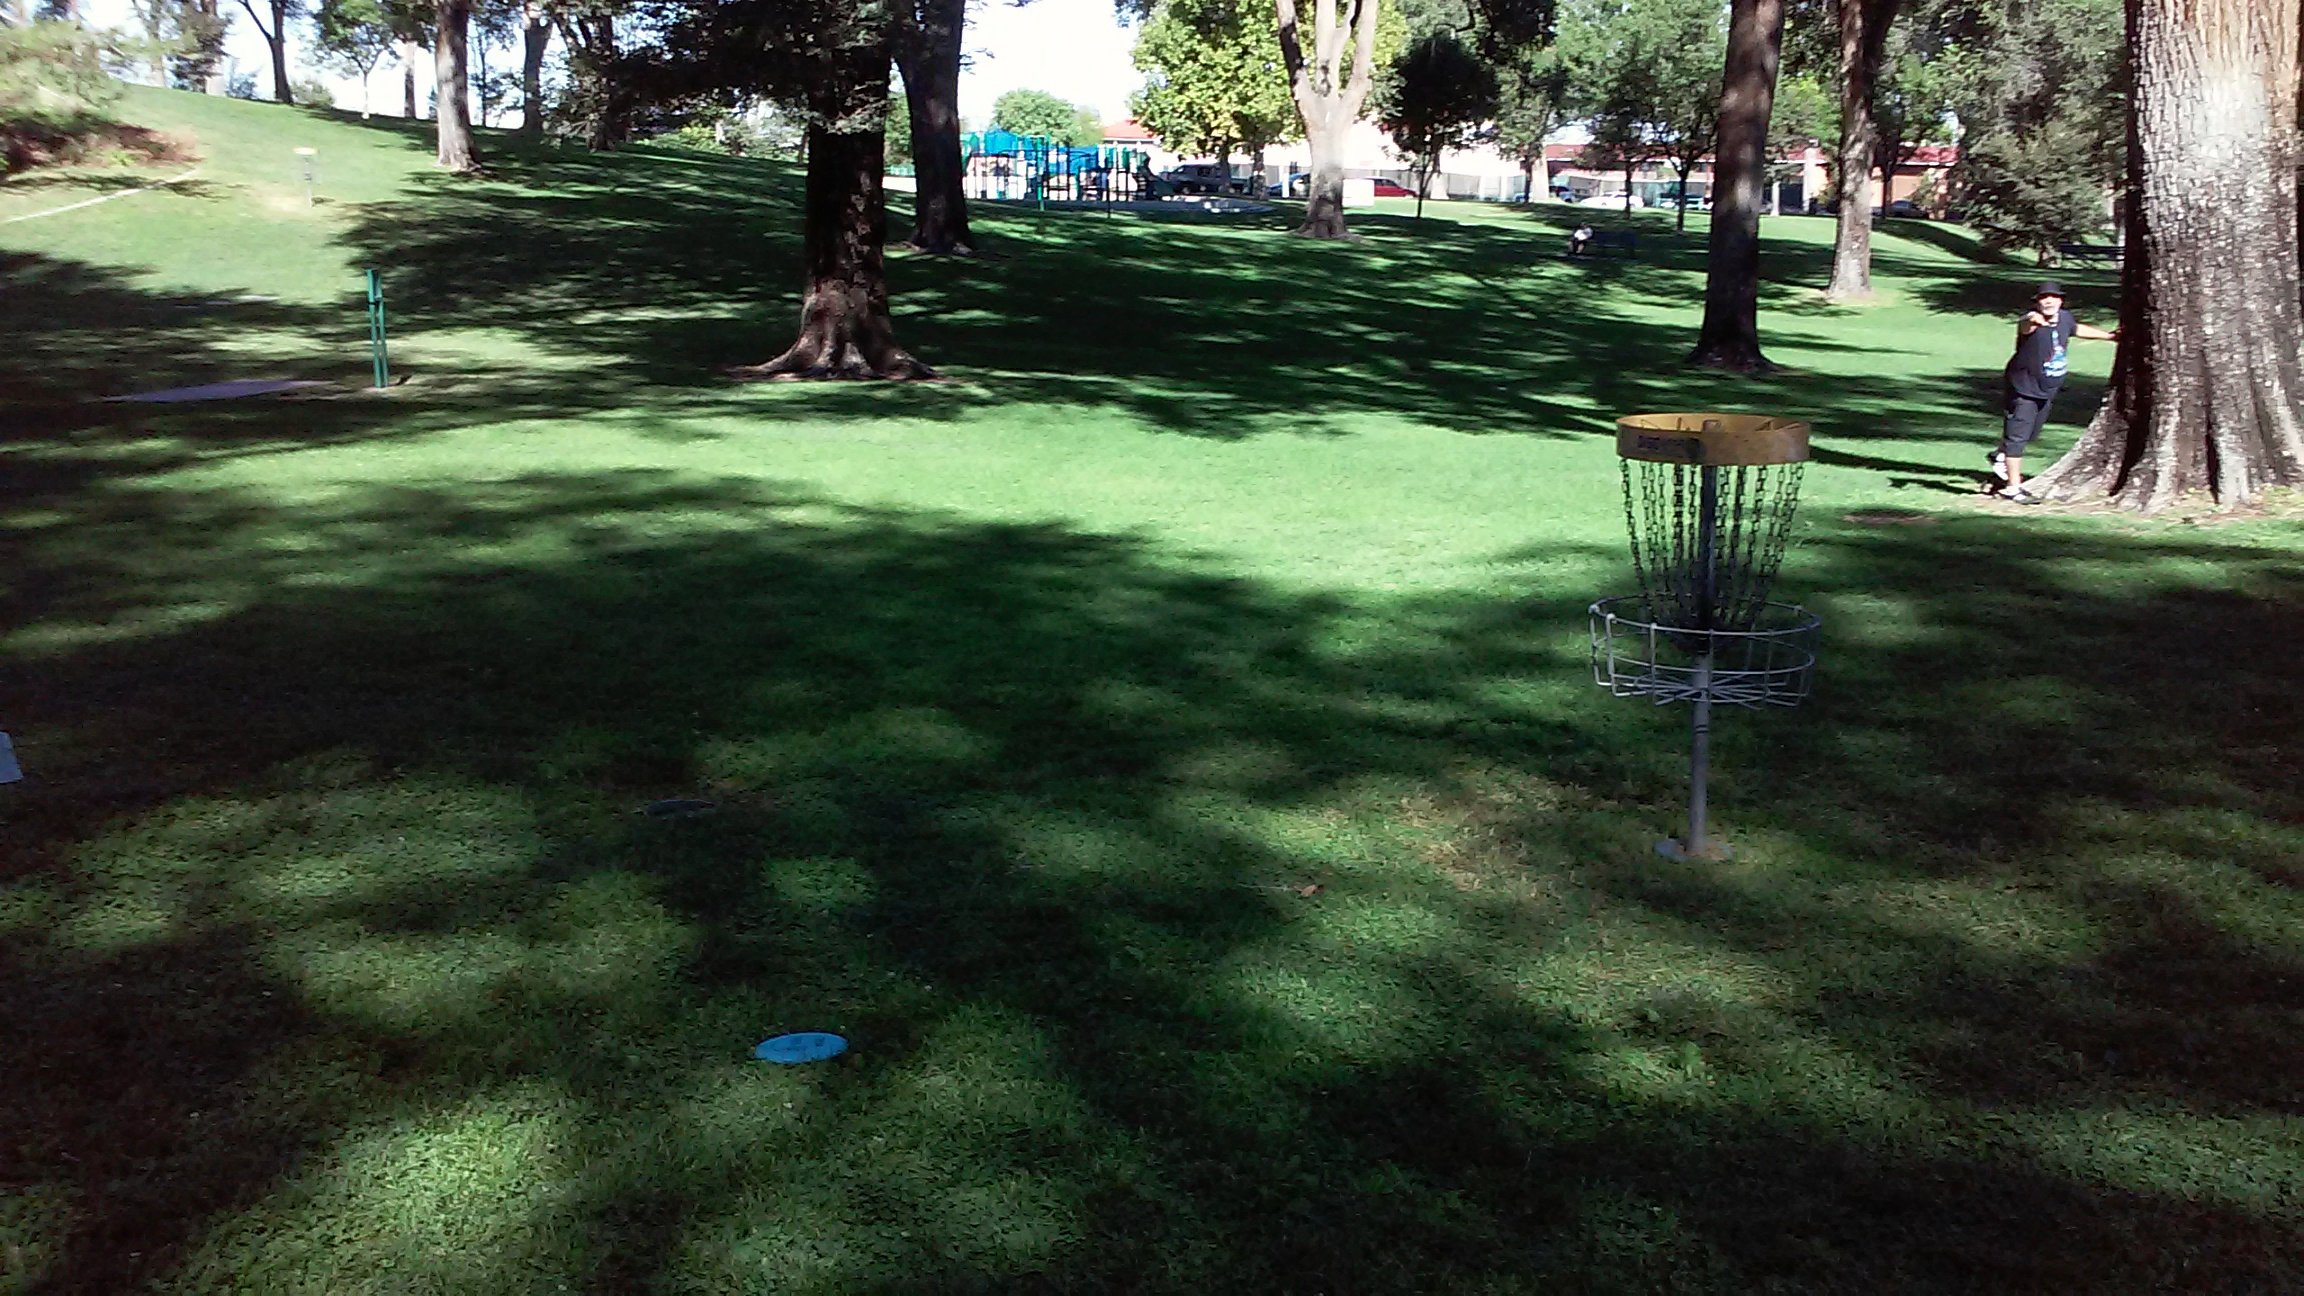 two people are on the field with a disc golf game